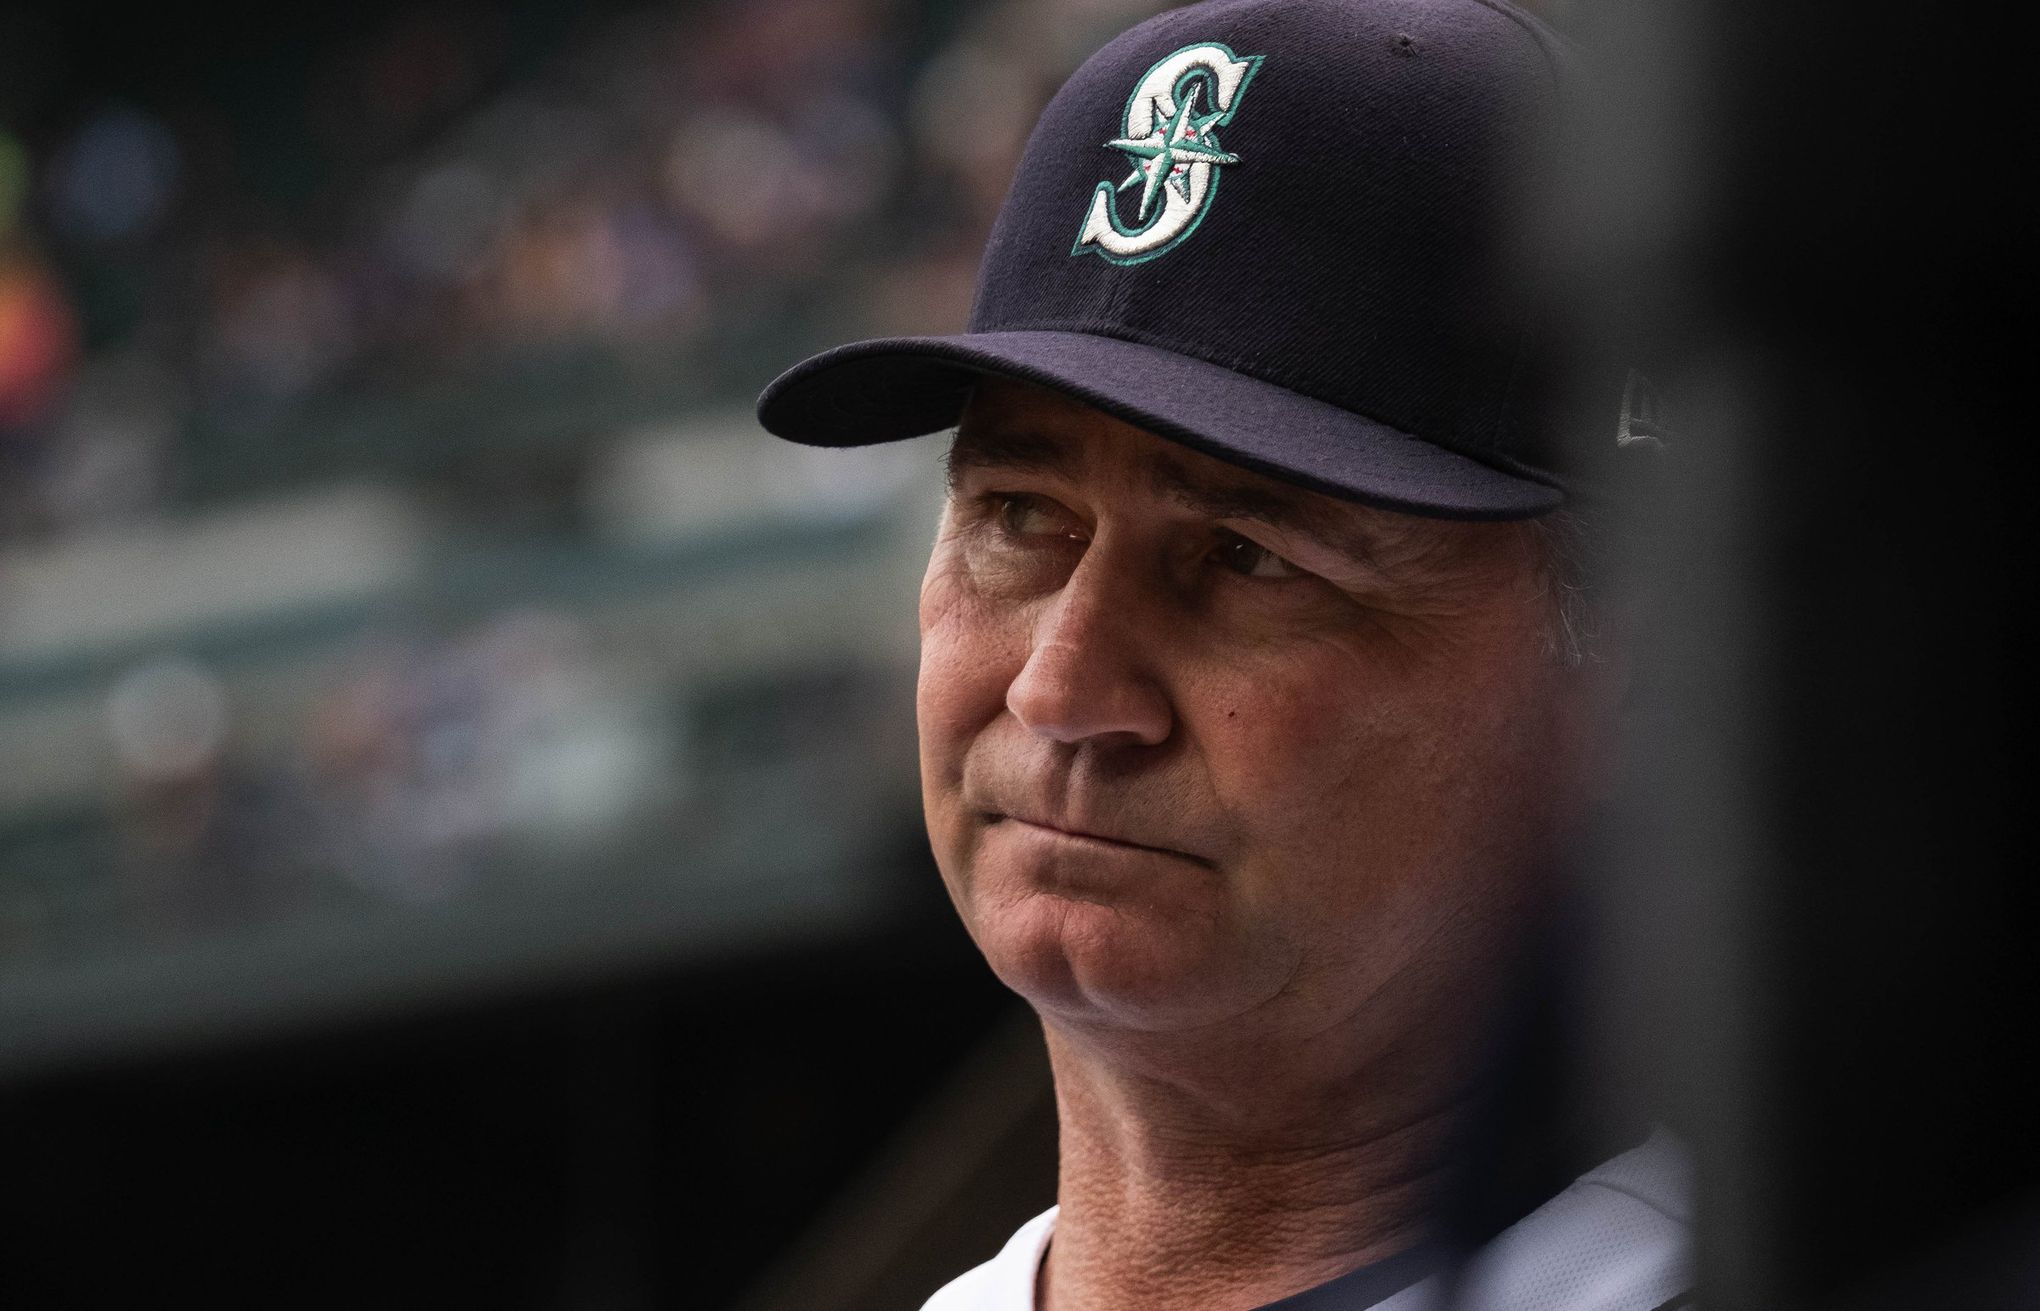 Mariners soar behind the steady leadership of manager Scott